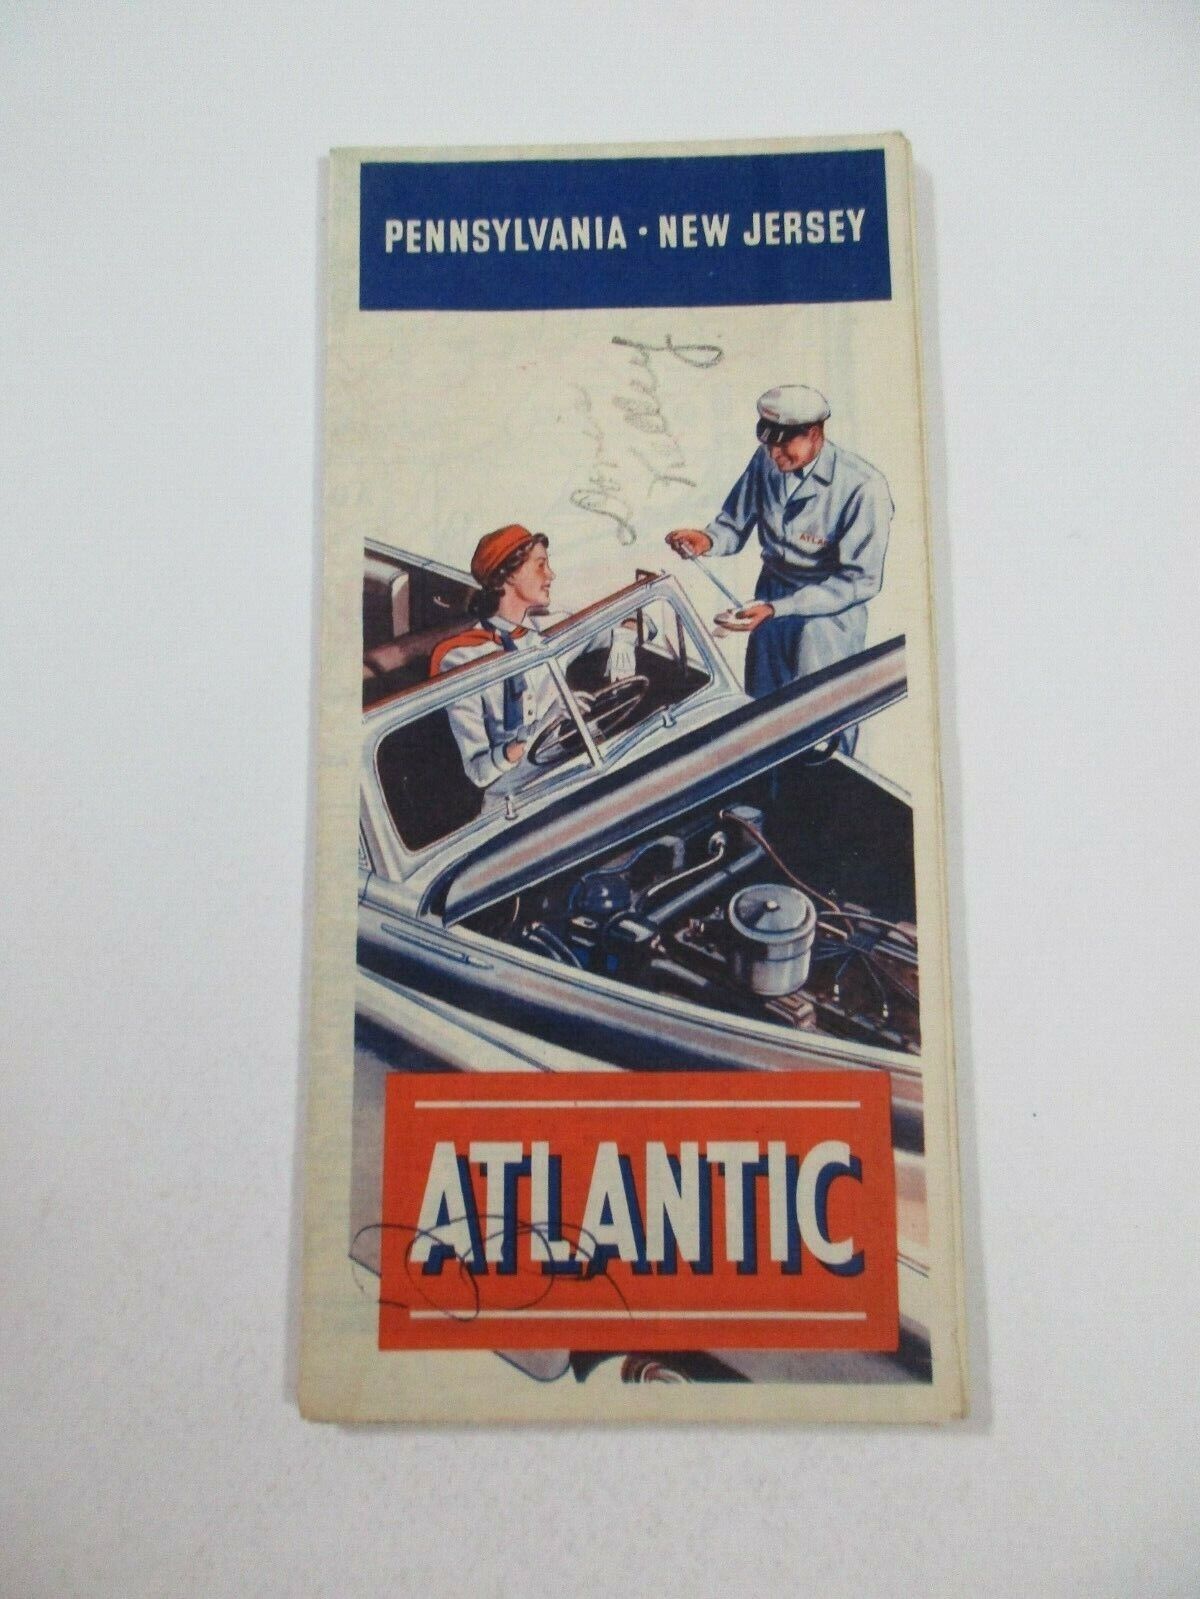 Vintage Atlantic Pennsylvania New Jersey Gas Station Travel Road Map~37a